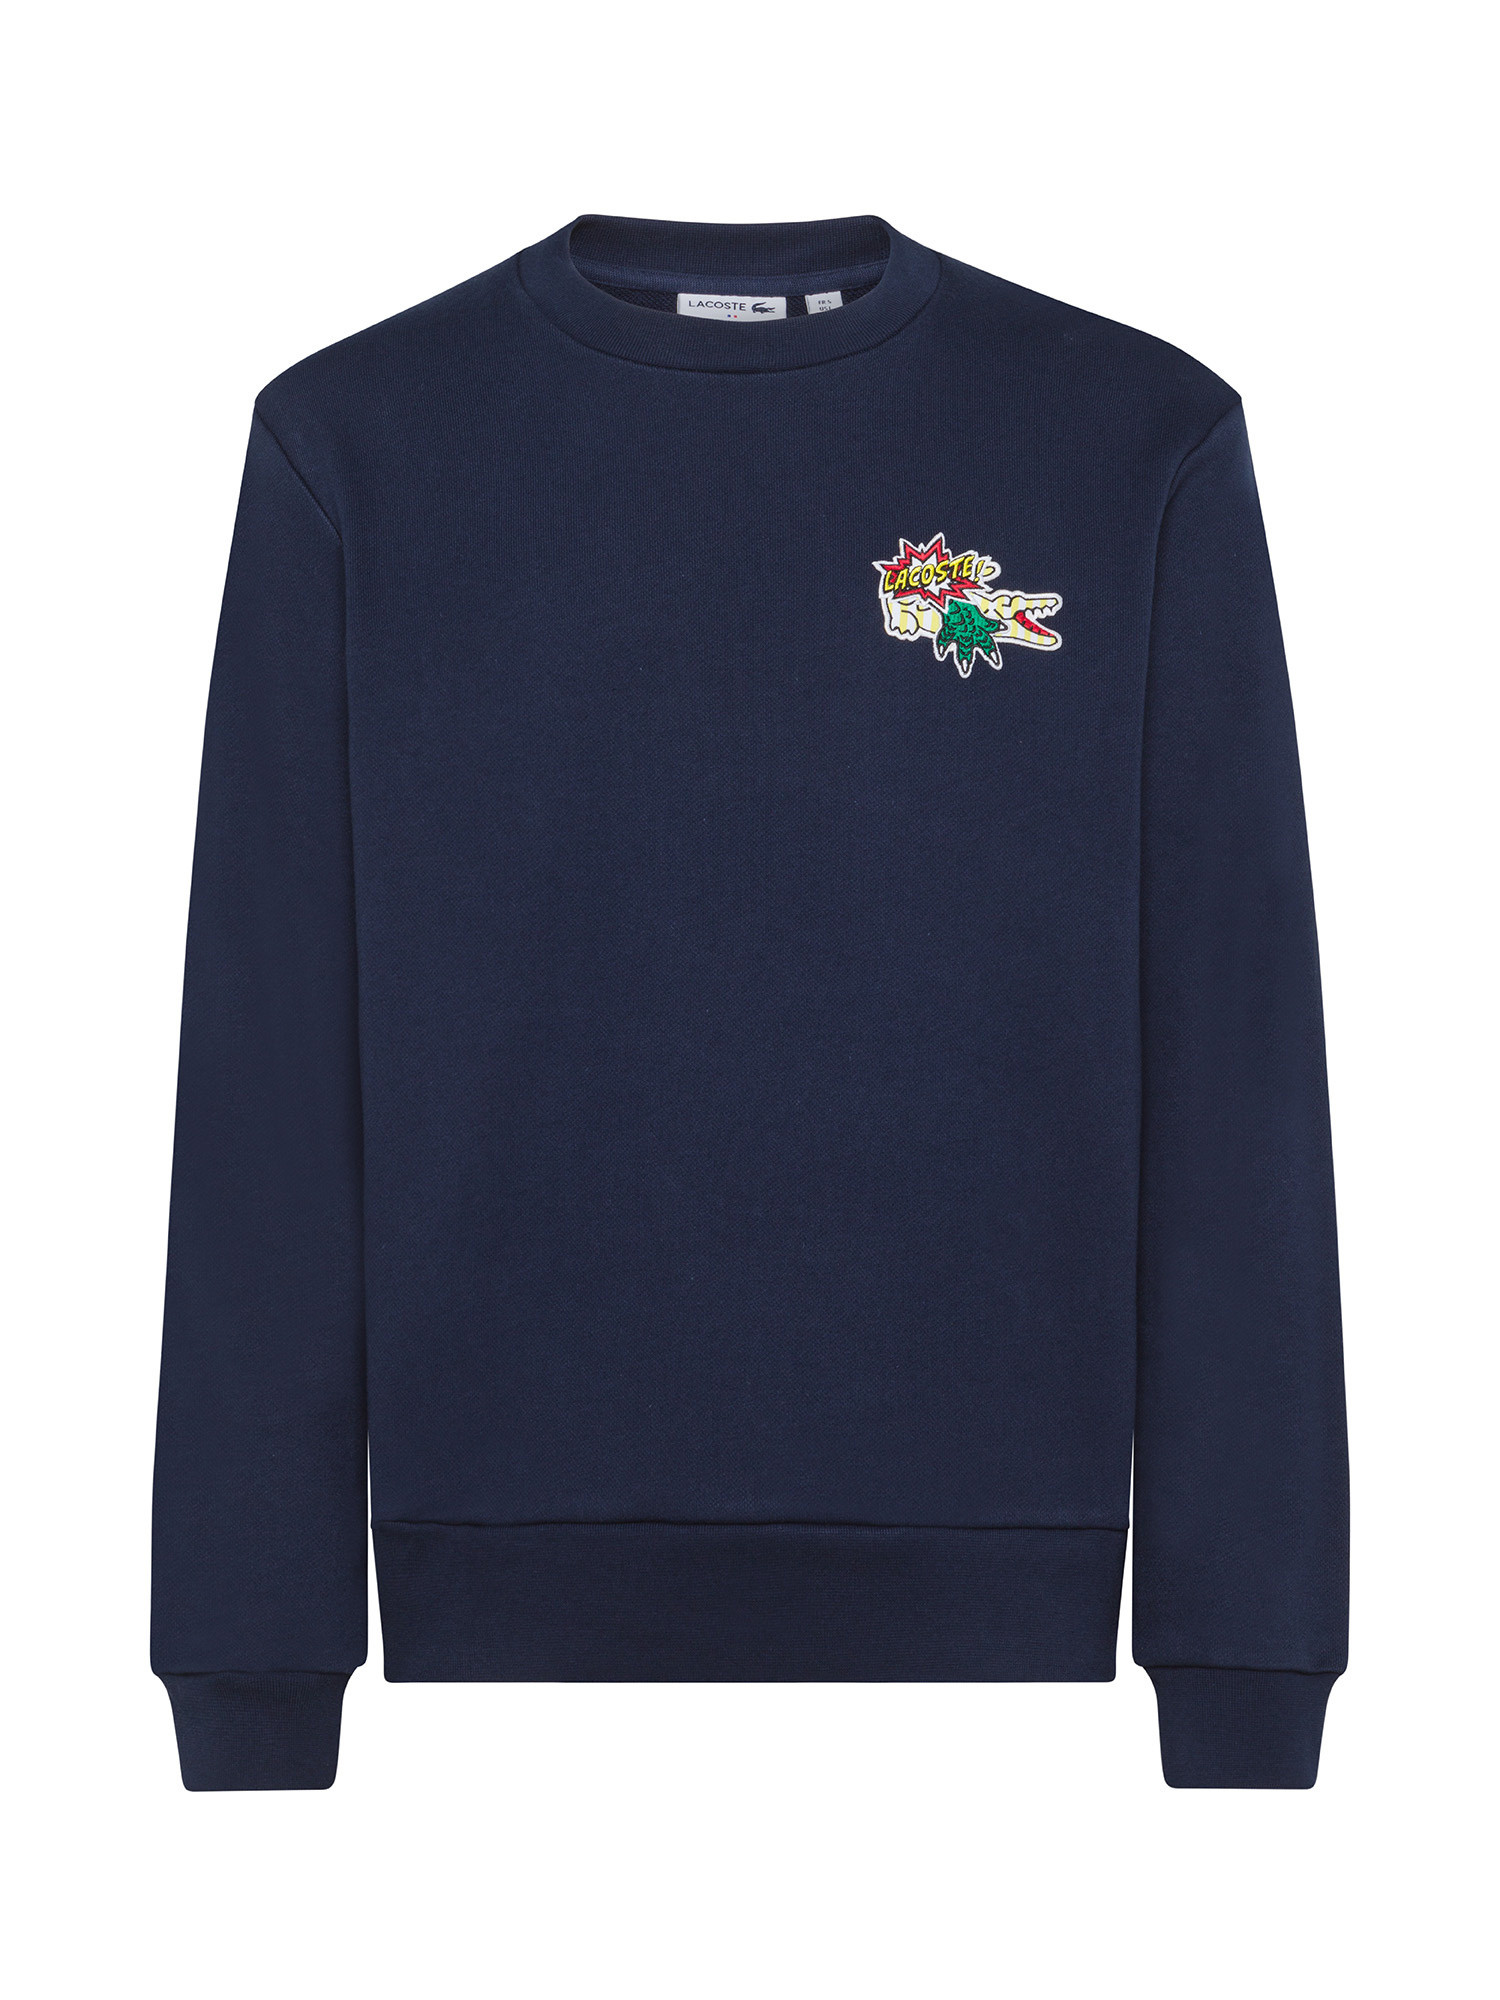 Lacoste - Men's organic cotton sweatshirt with Holiday crest, Blue, large image number 0